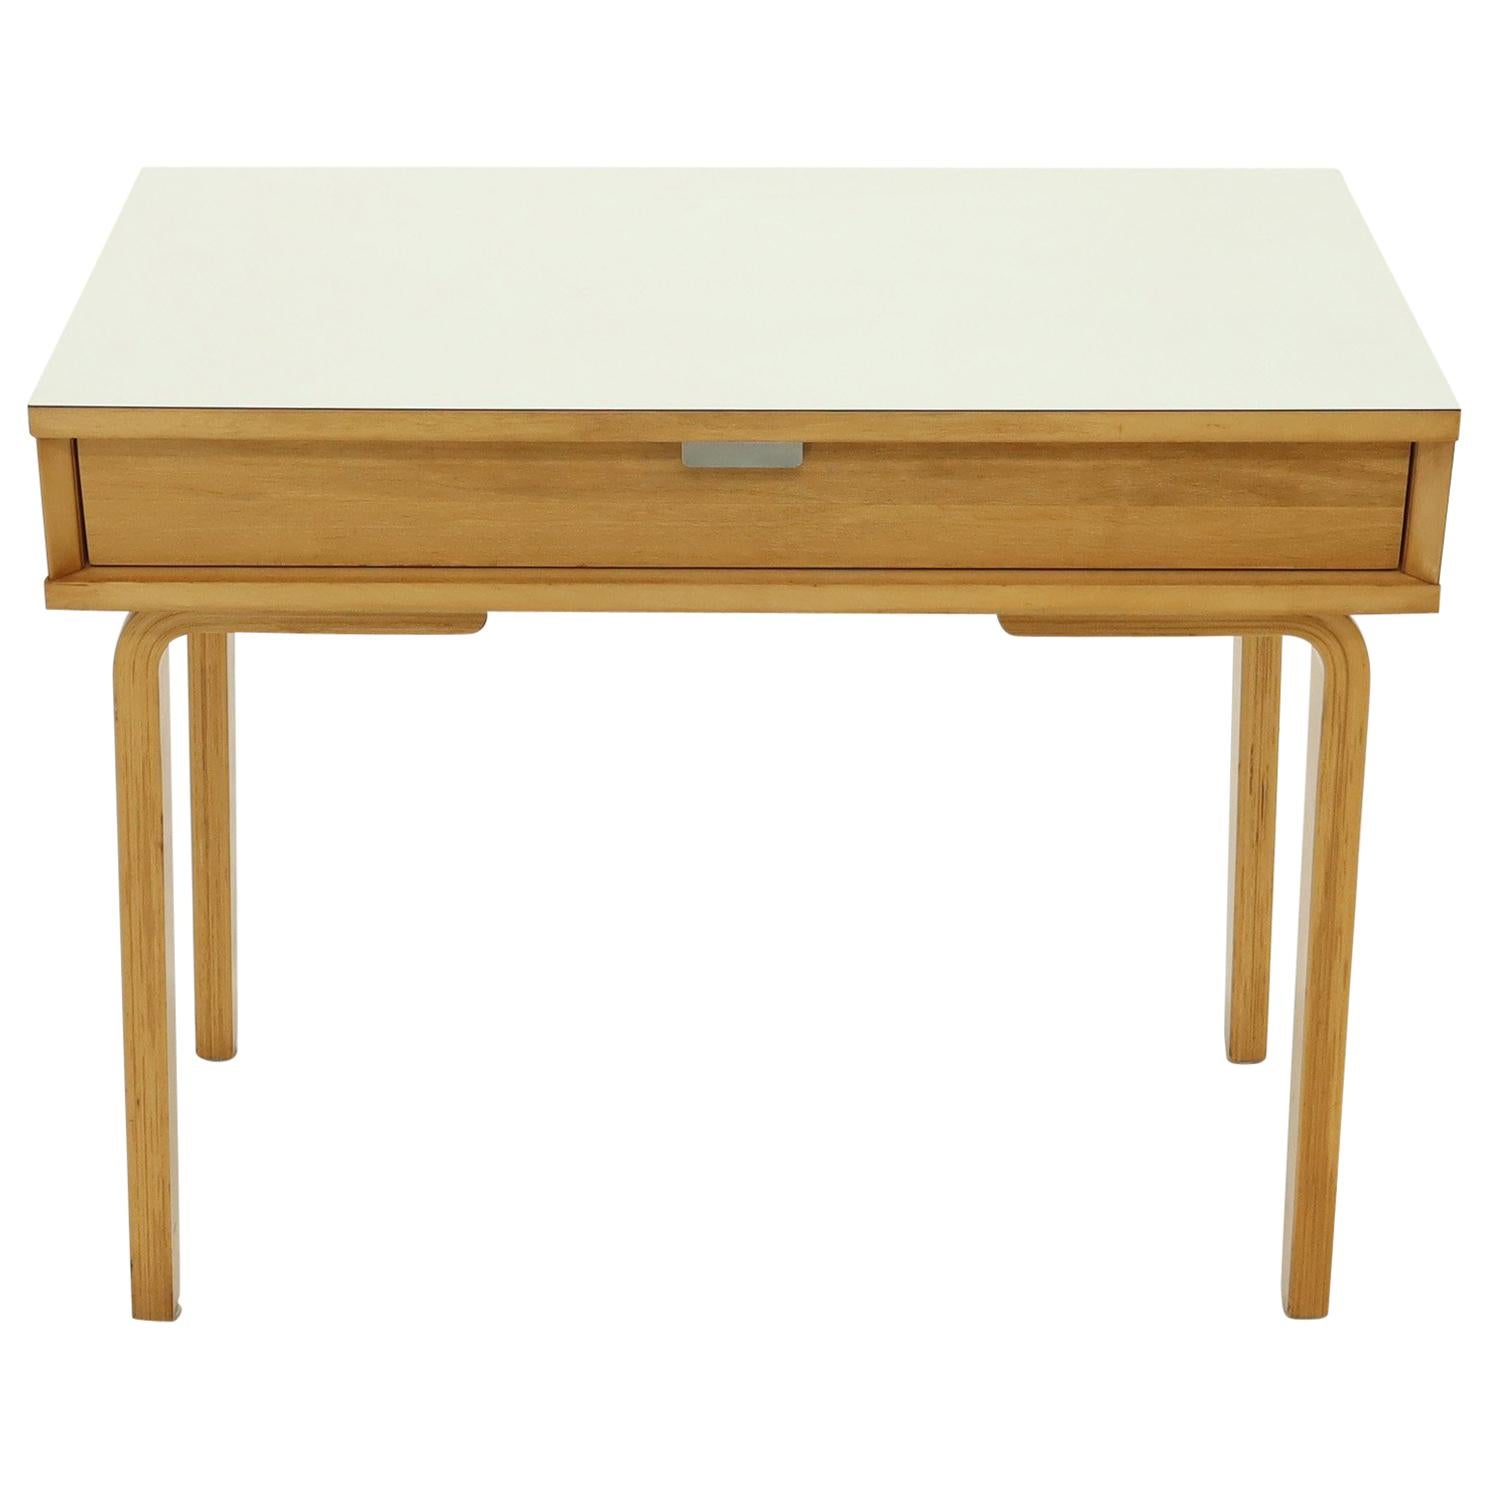 Birch Small Desk or Console Table by Thonet